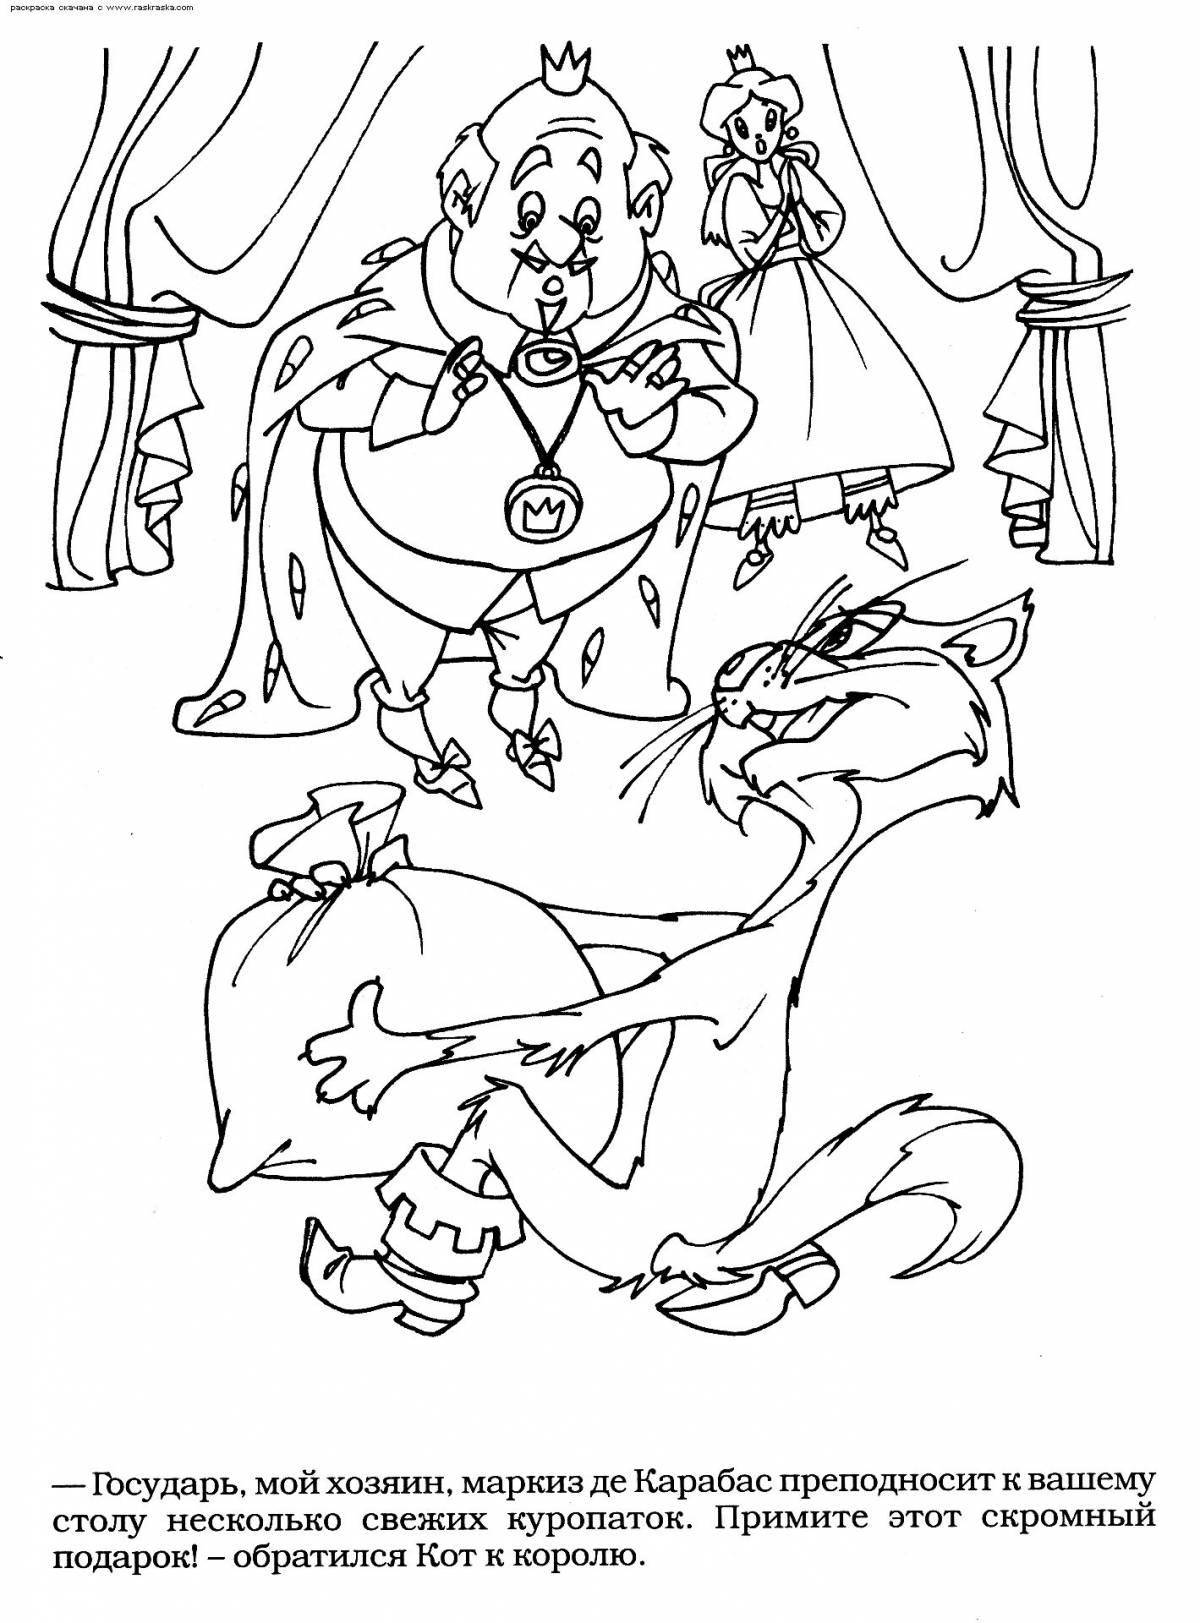 Charles Perrault's attractive Puss in Boots coloring book